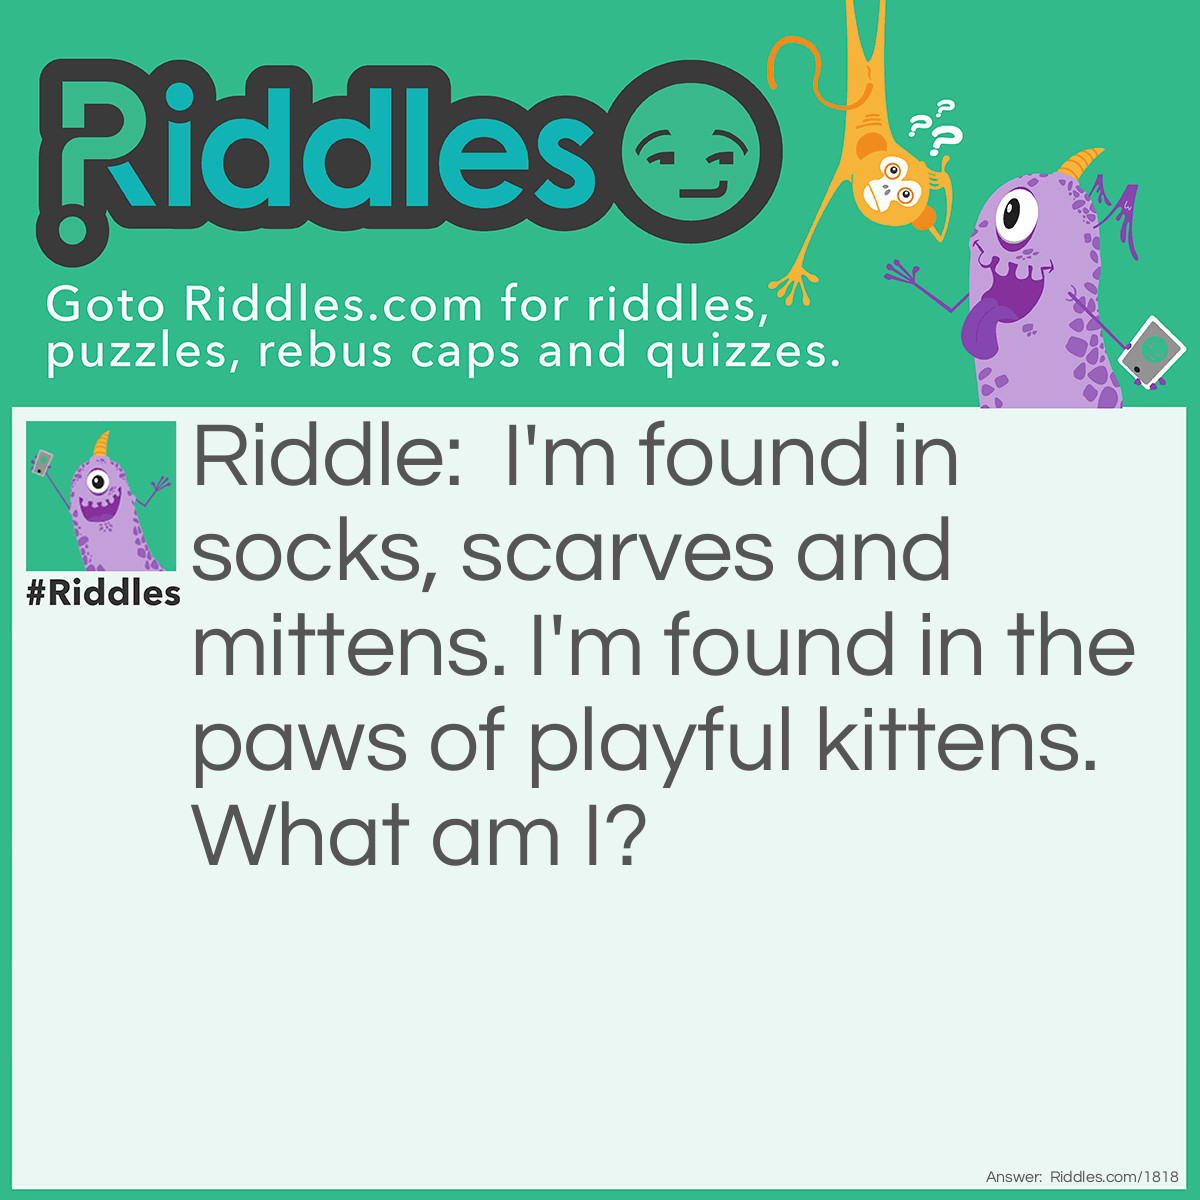 Riddle: I'm found in socks, scarves, and mittens. I'm found in the paws of playful kittens. What am I? Answer: Yarn.